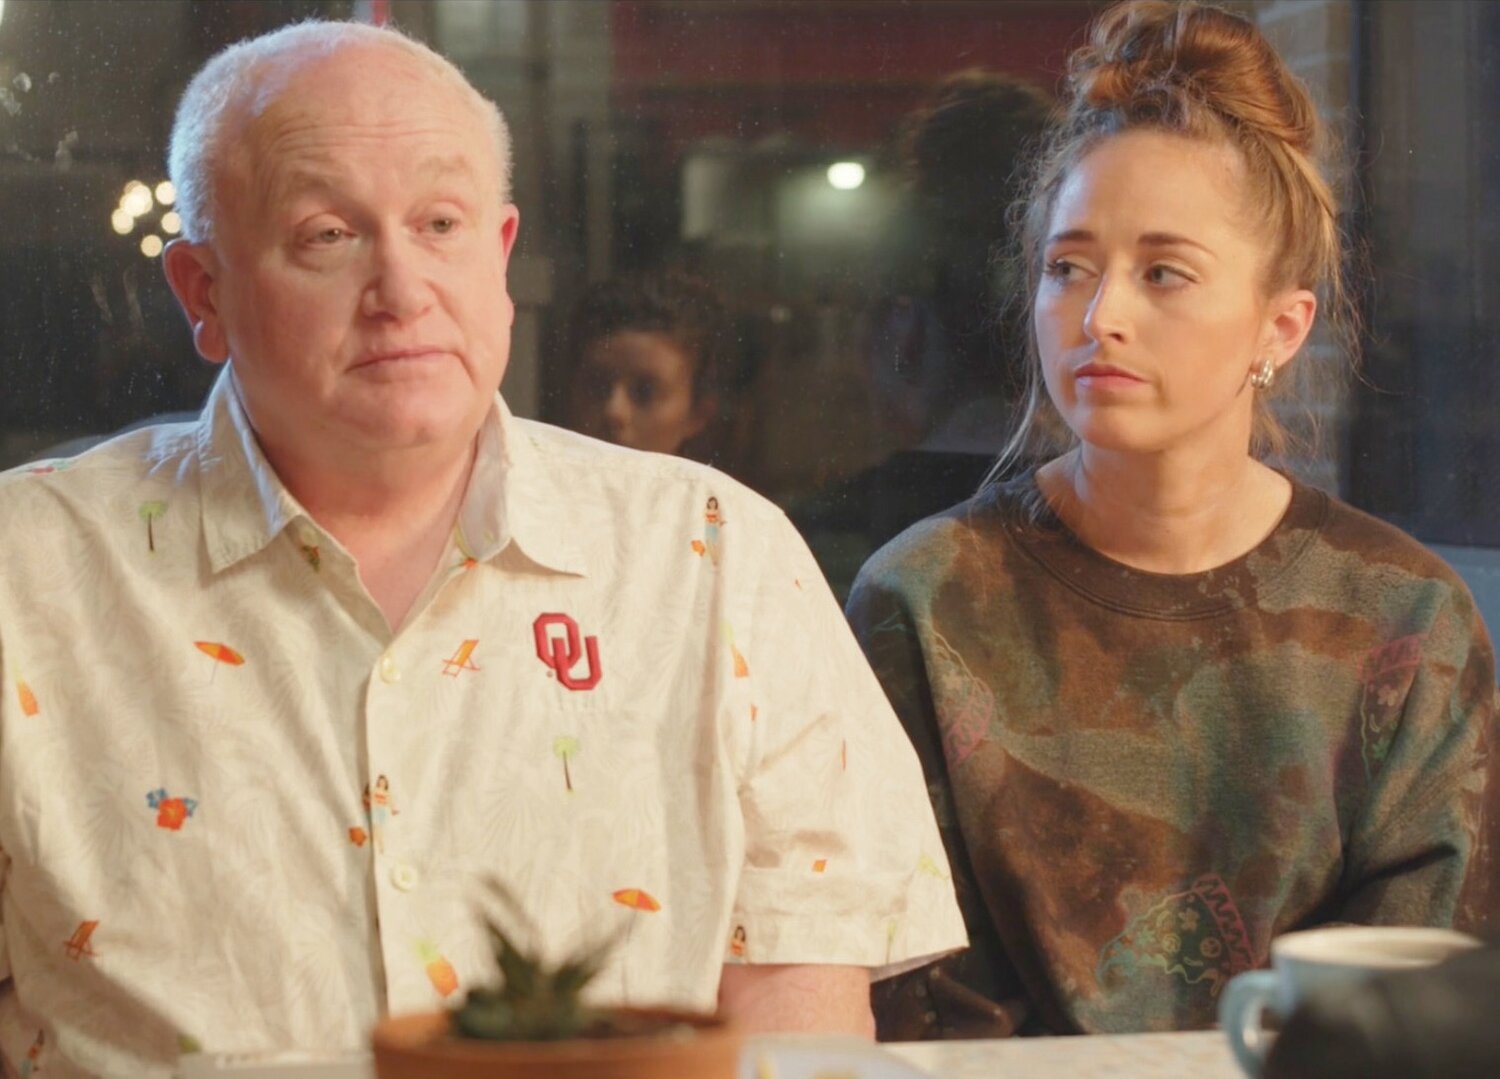 Bud Elder as the character Boomer speaking with his assistant Sara (Paige Kriet) in the movie “Second Chances.”